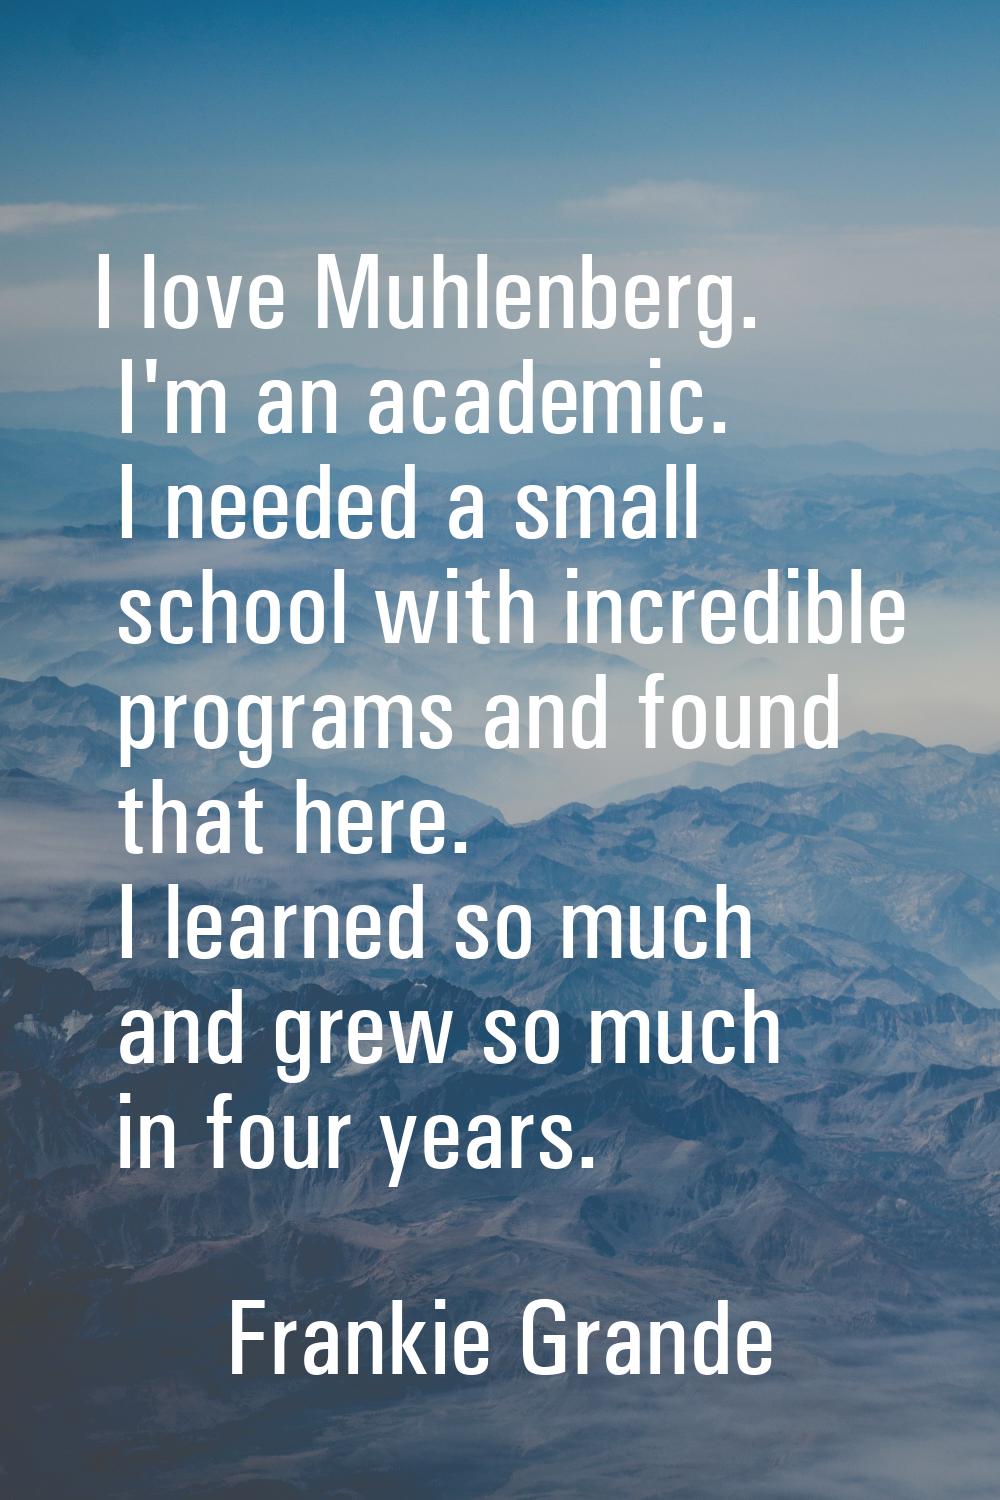 I love Muhlenberg. I'm an academic. I needed a small school with incredible programs and found that